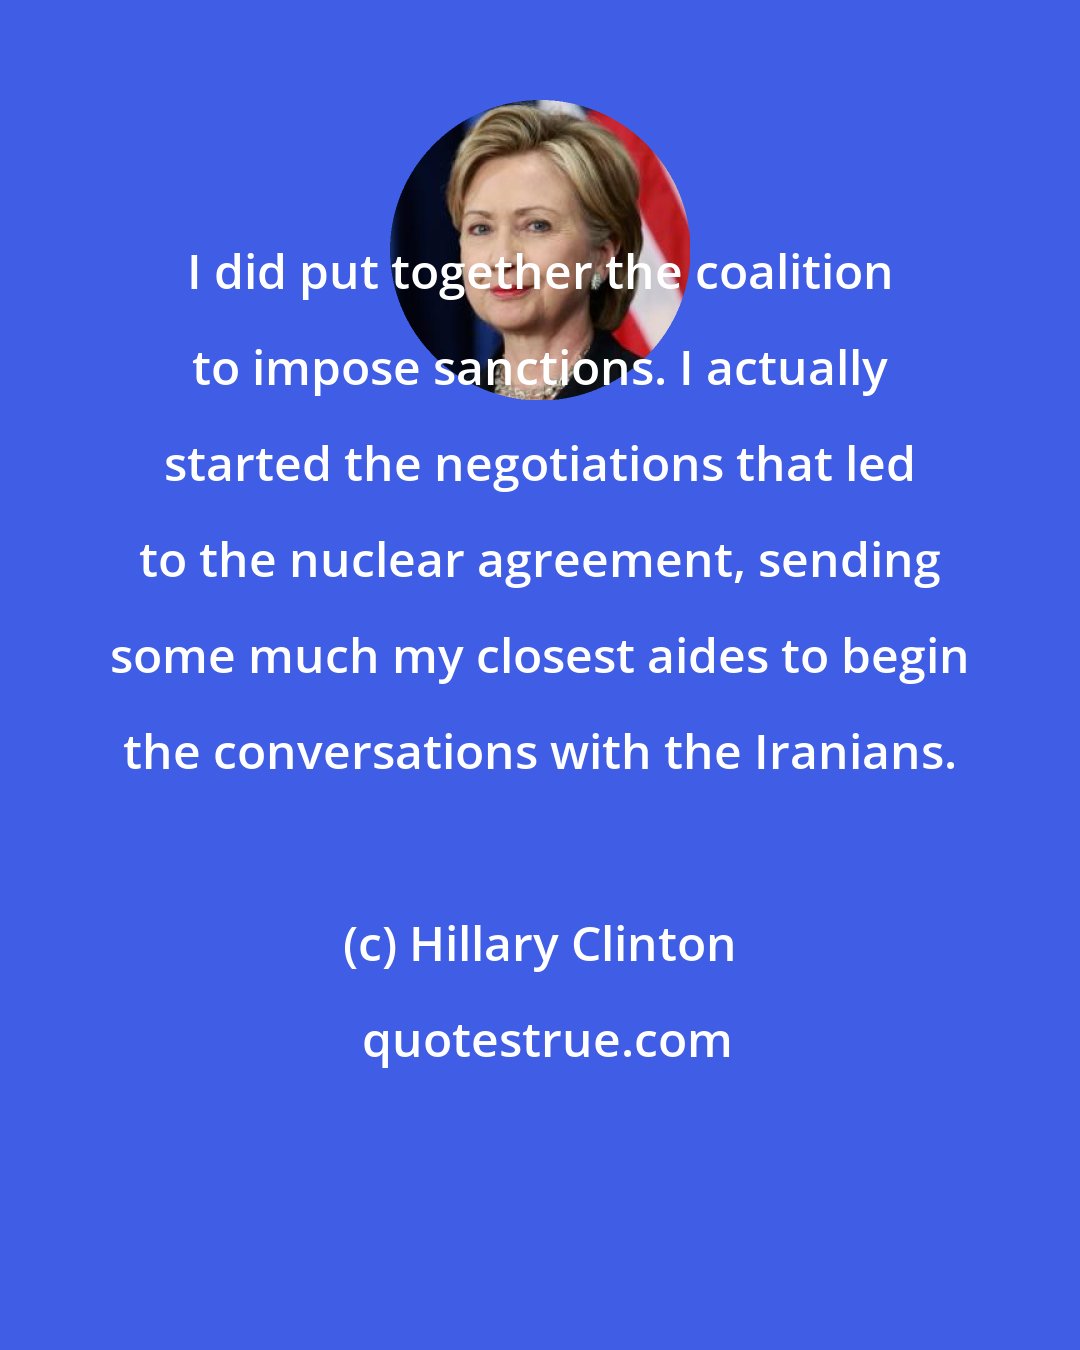 Hillary Clinton: I did put together the coalition to impose sanctions. I actually started the negotiations that led to the nuclear agreement, sending some much my closest aides to begin the conversations with the Iranians.